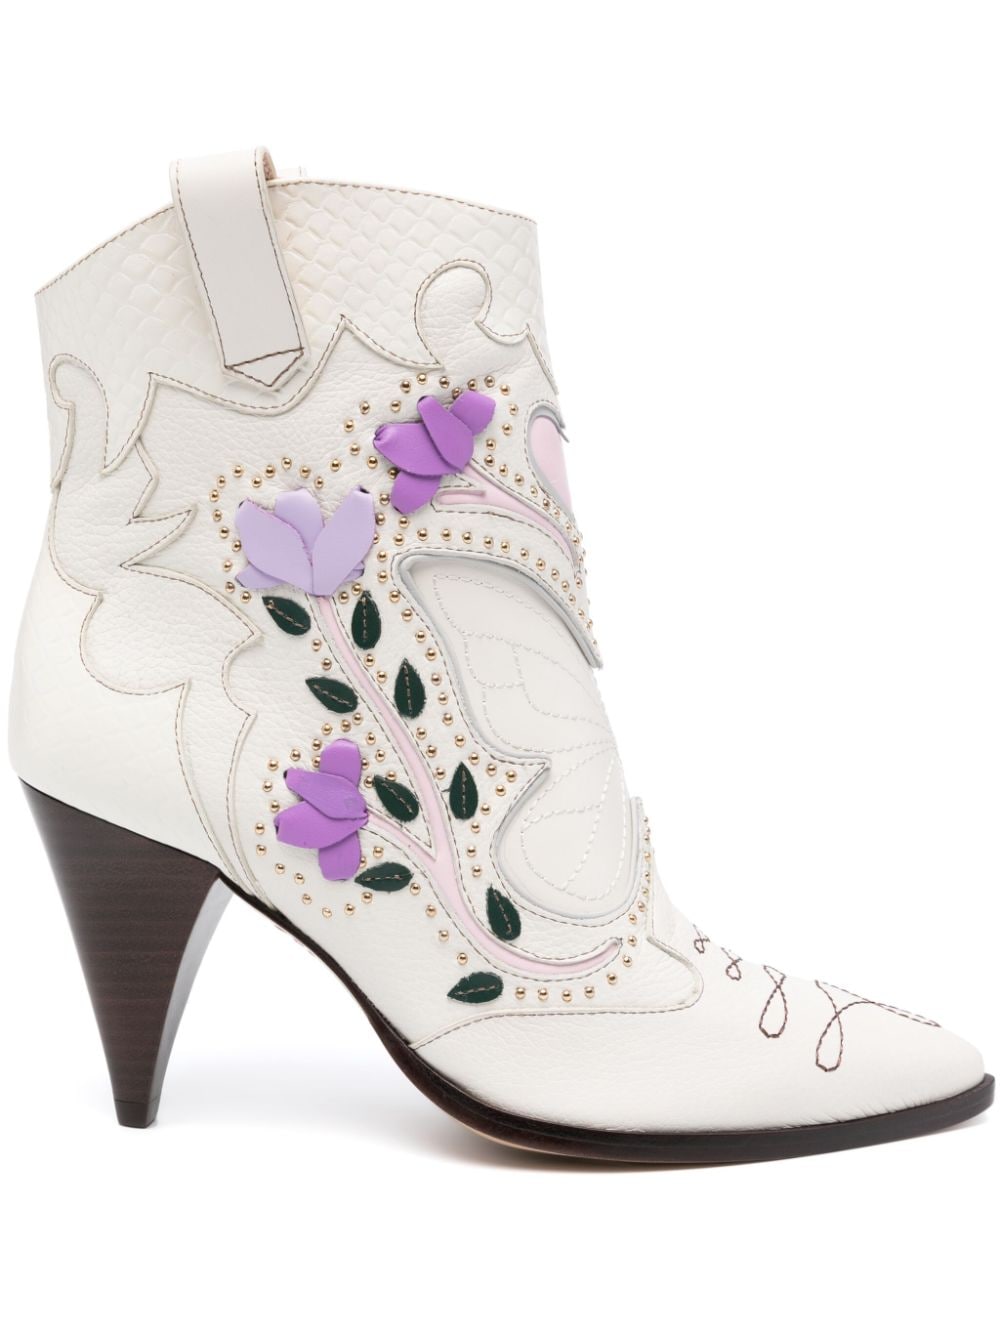 Sophia Webster Shelby 85mm Cowboy Boots In White